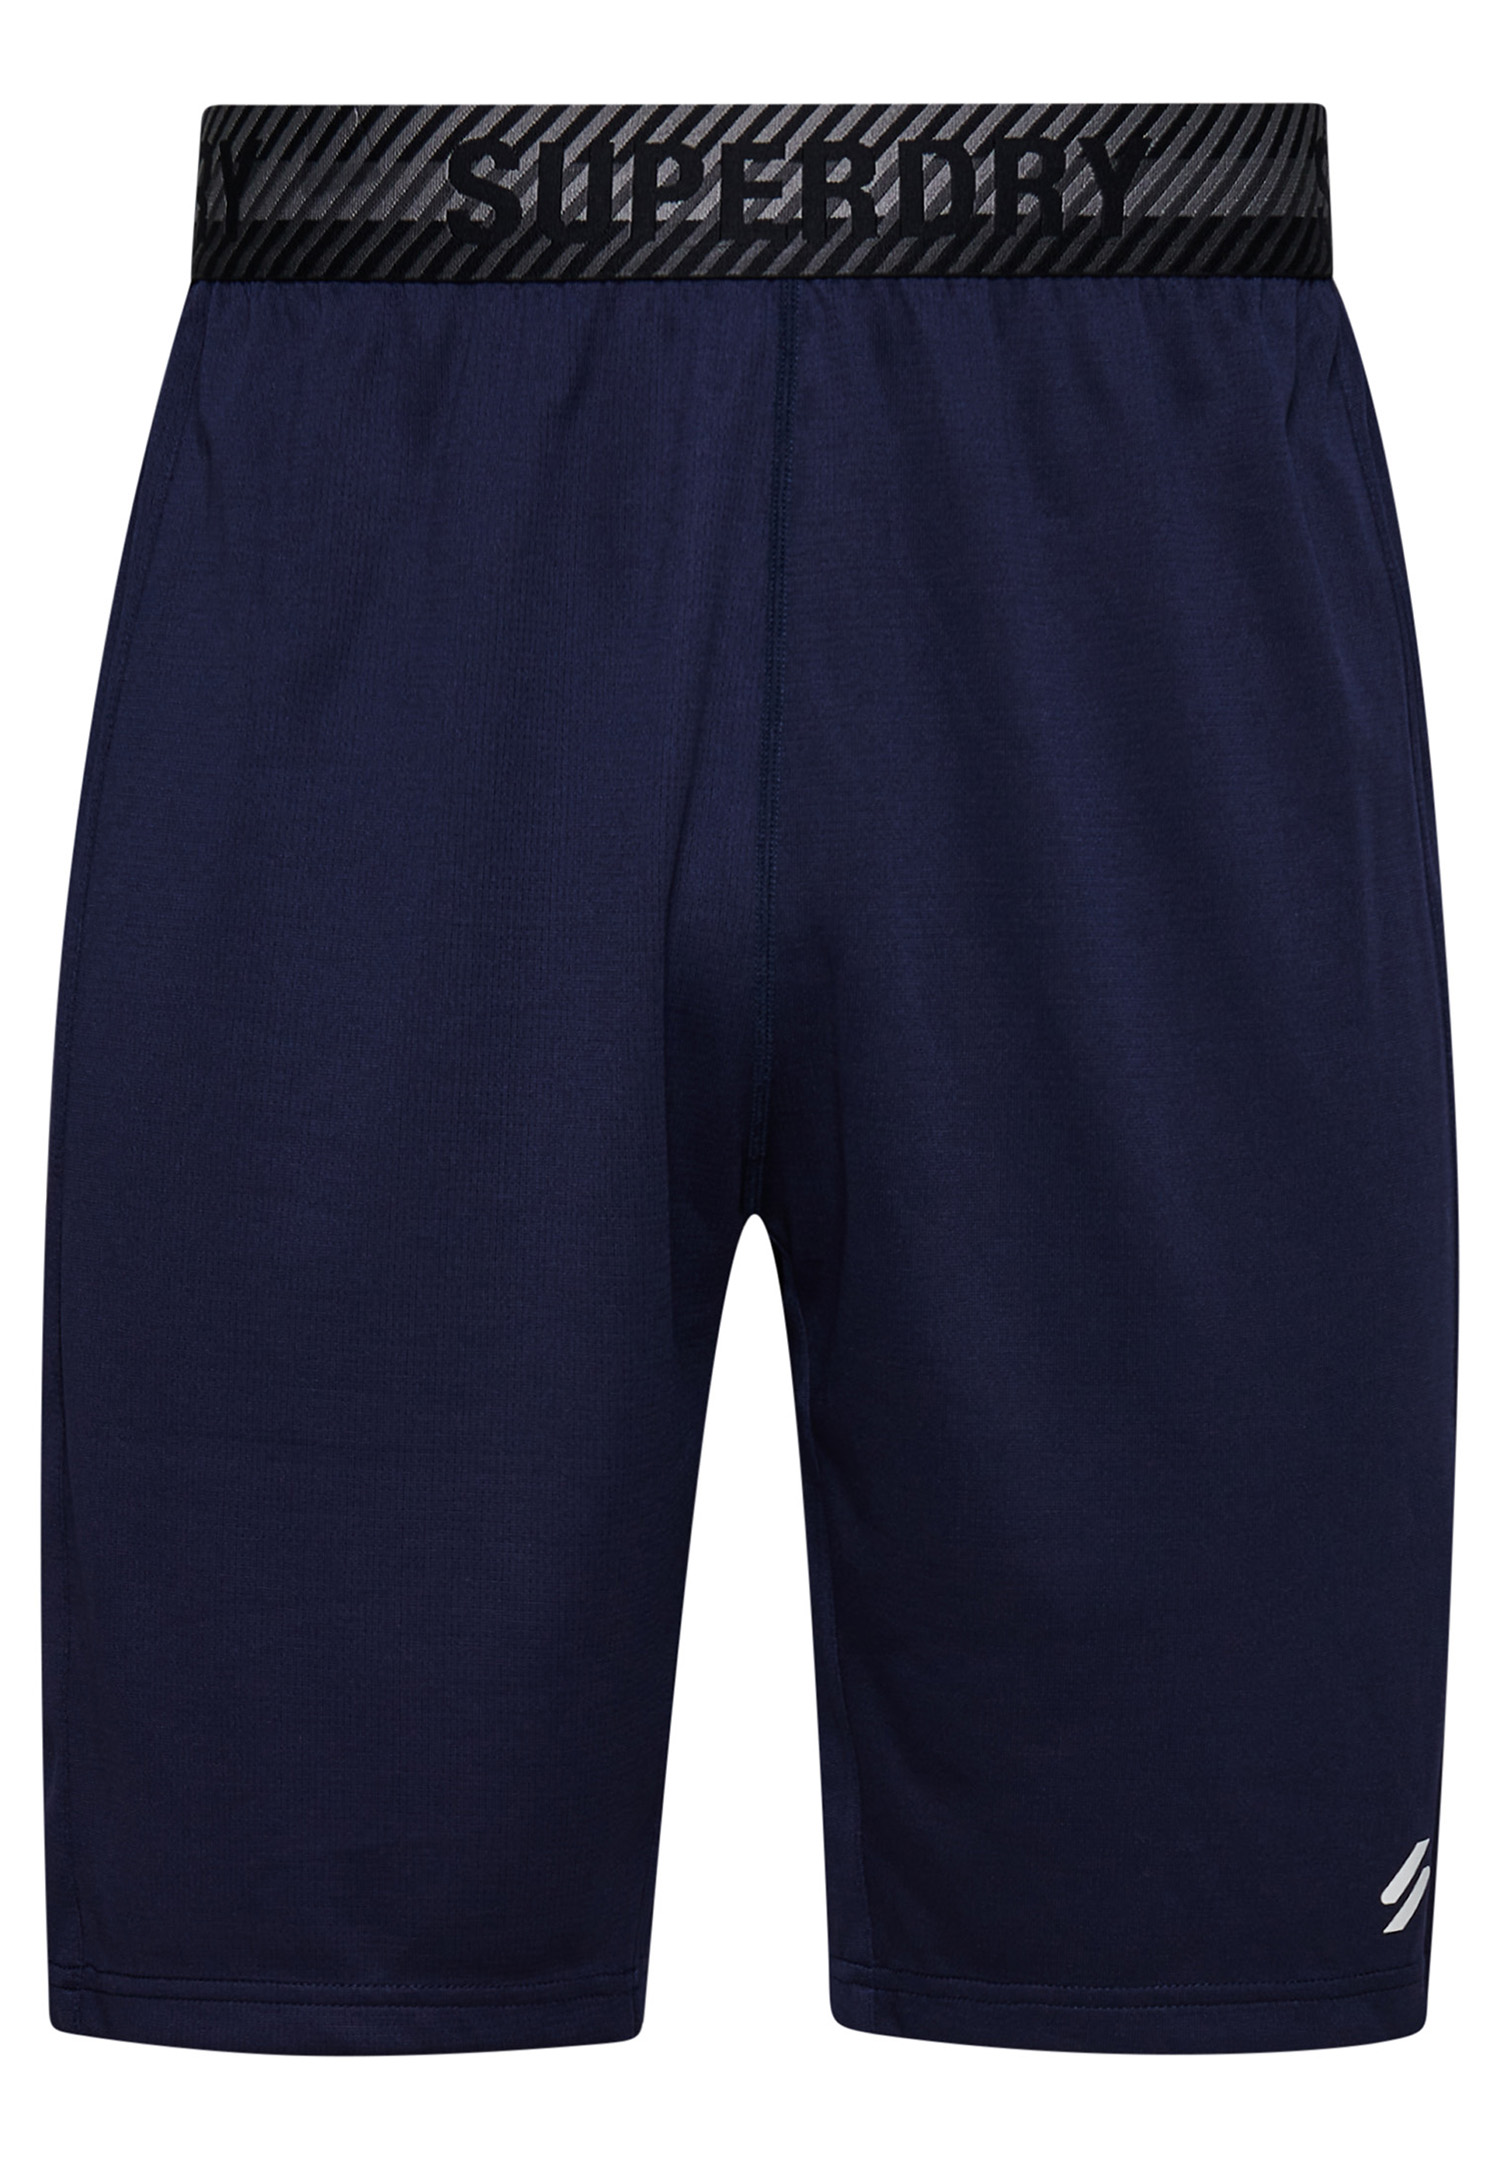 Superdry Herren Core Relaxed Shorts MS311301A blau